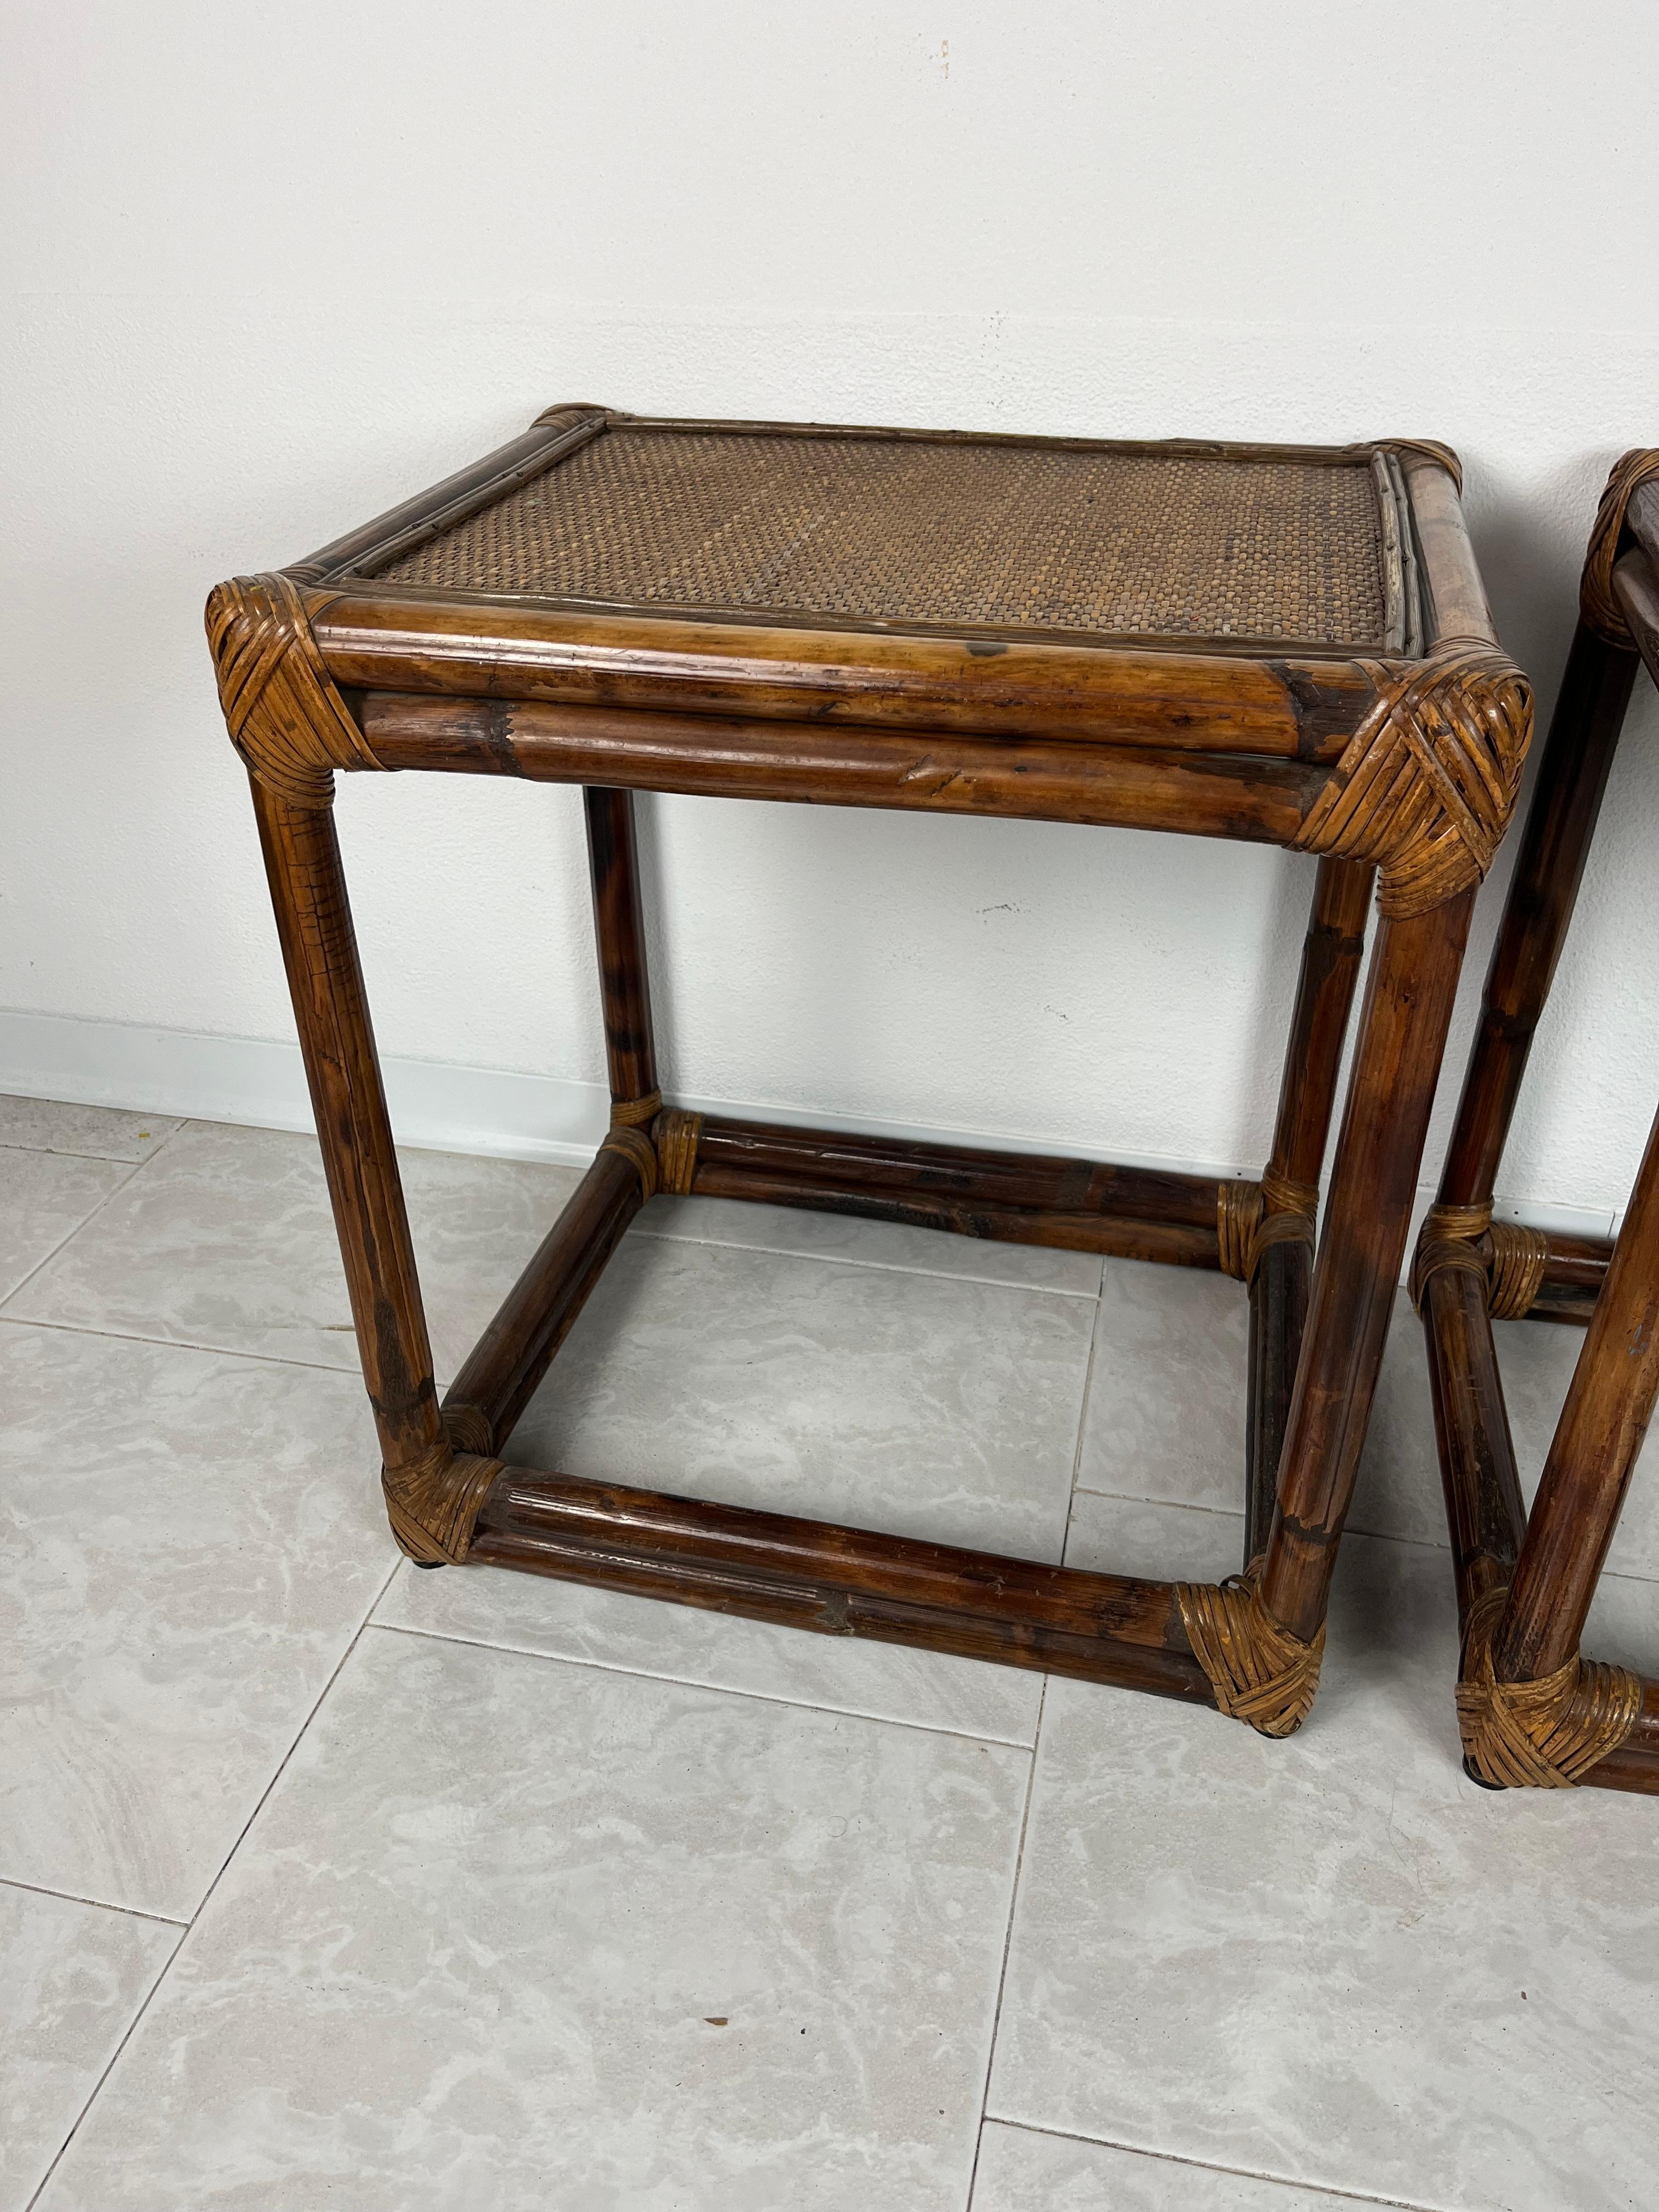 Pair of bamboo bedside tables, Italy, 1960s
Found in a Sicilian noble villa, they are in good condition.
Small defects and signs of aging.